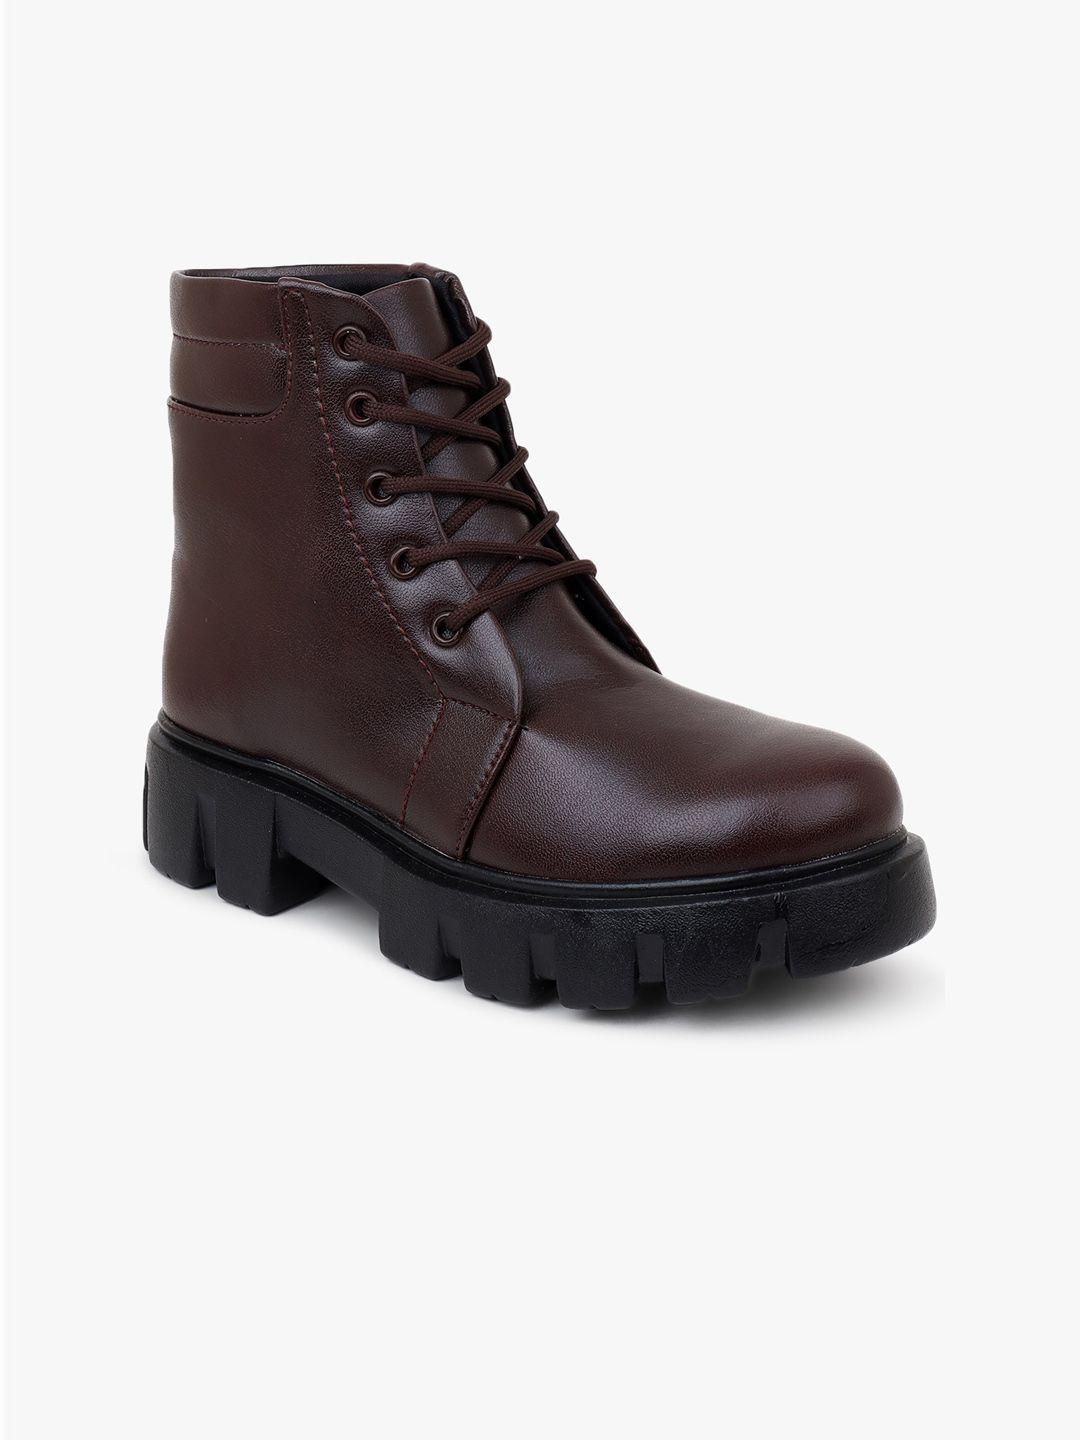 the roadster lifestyle co. women brown textured heeled mid-top regular boots